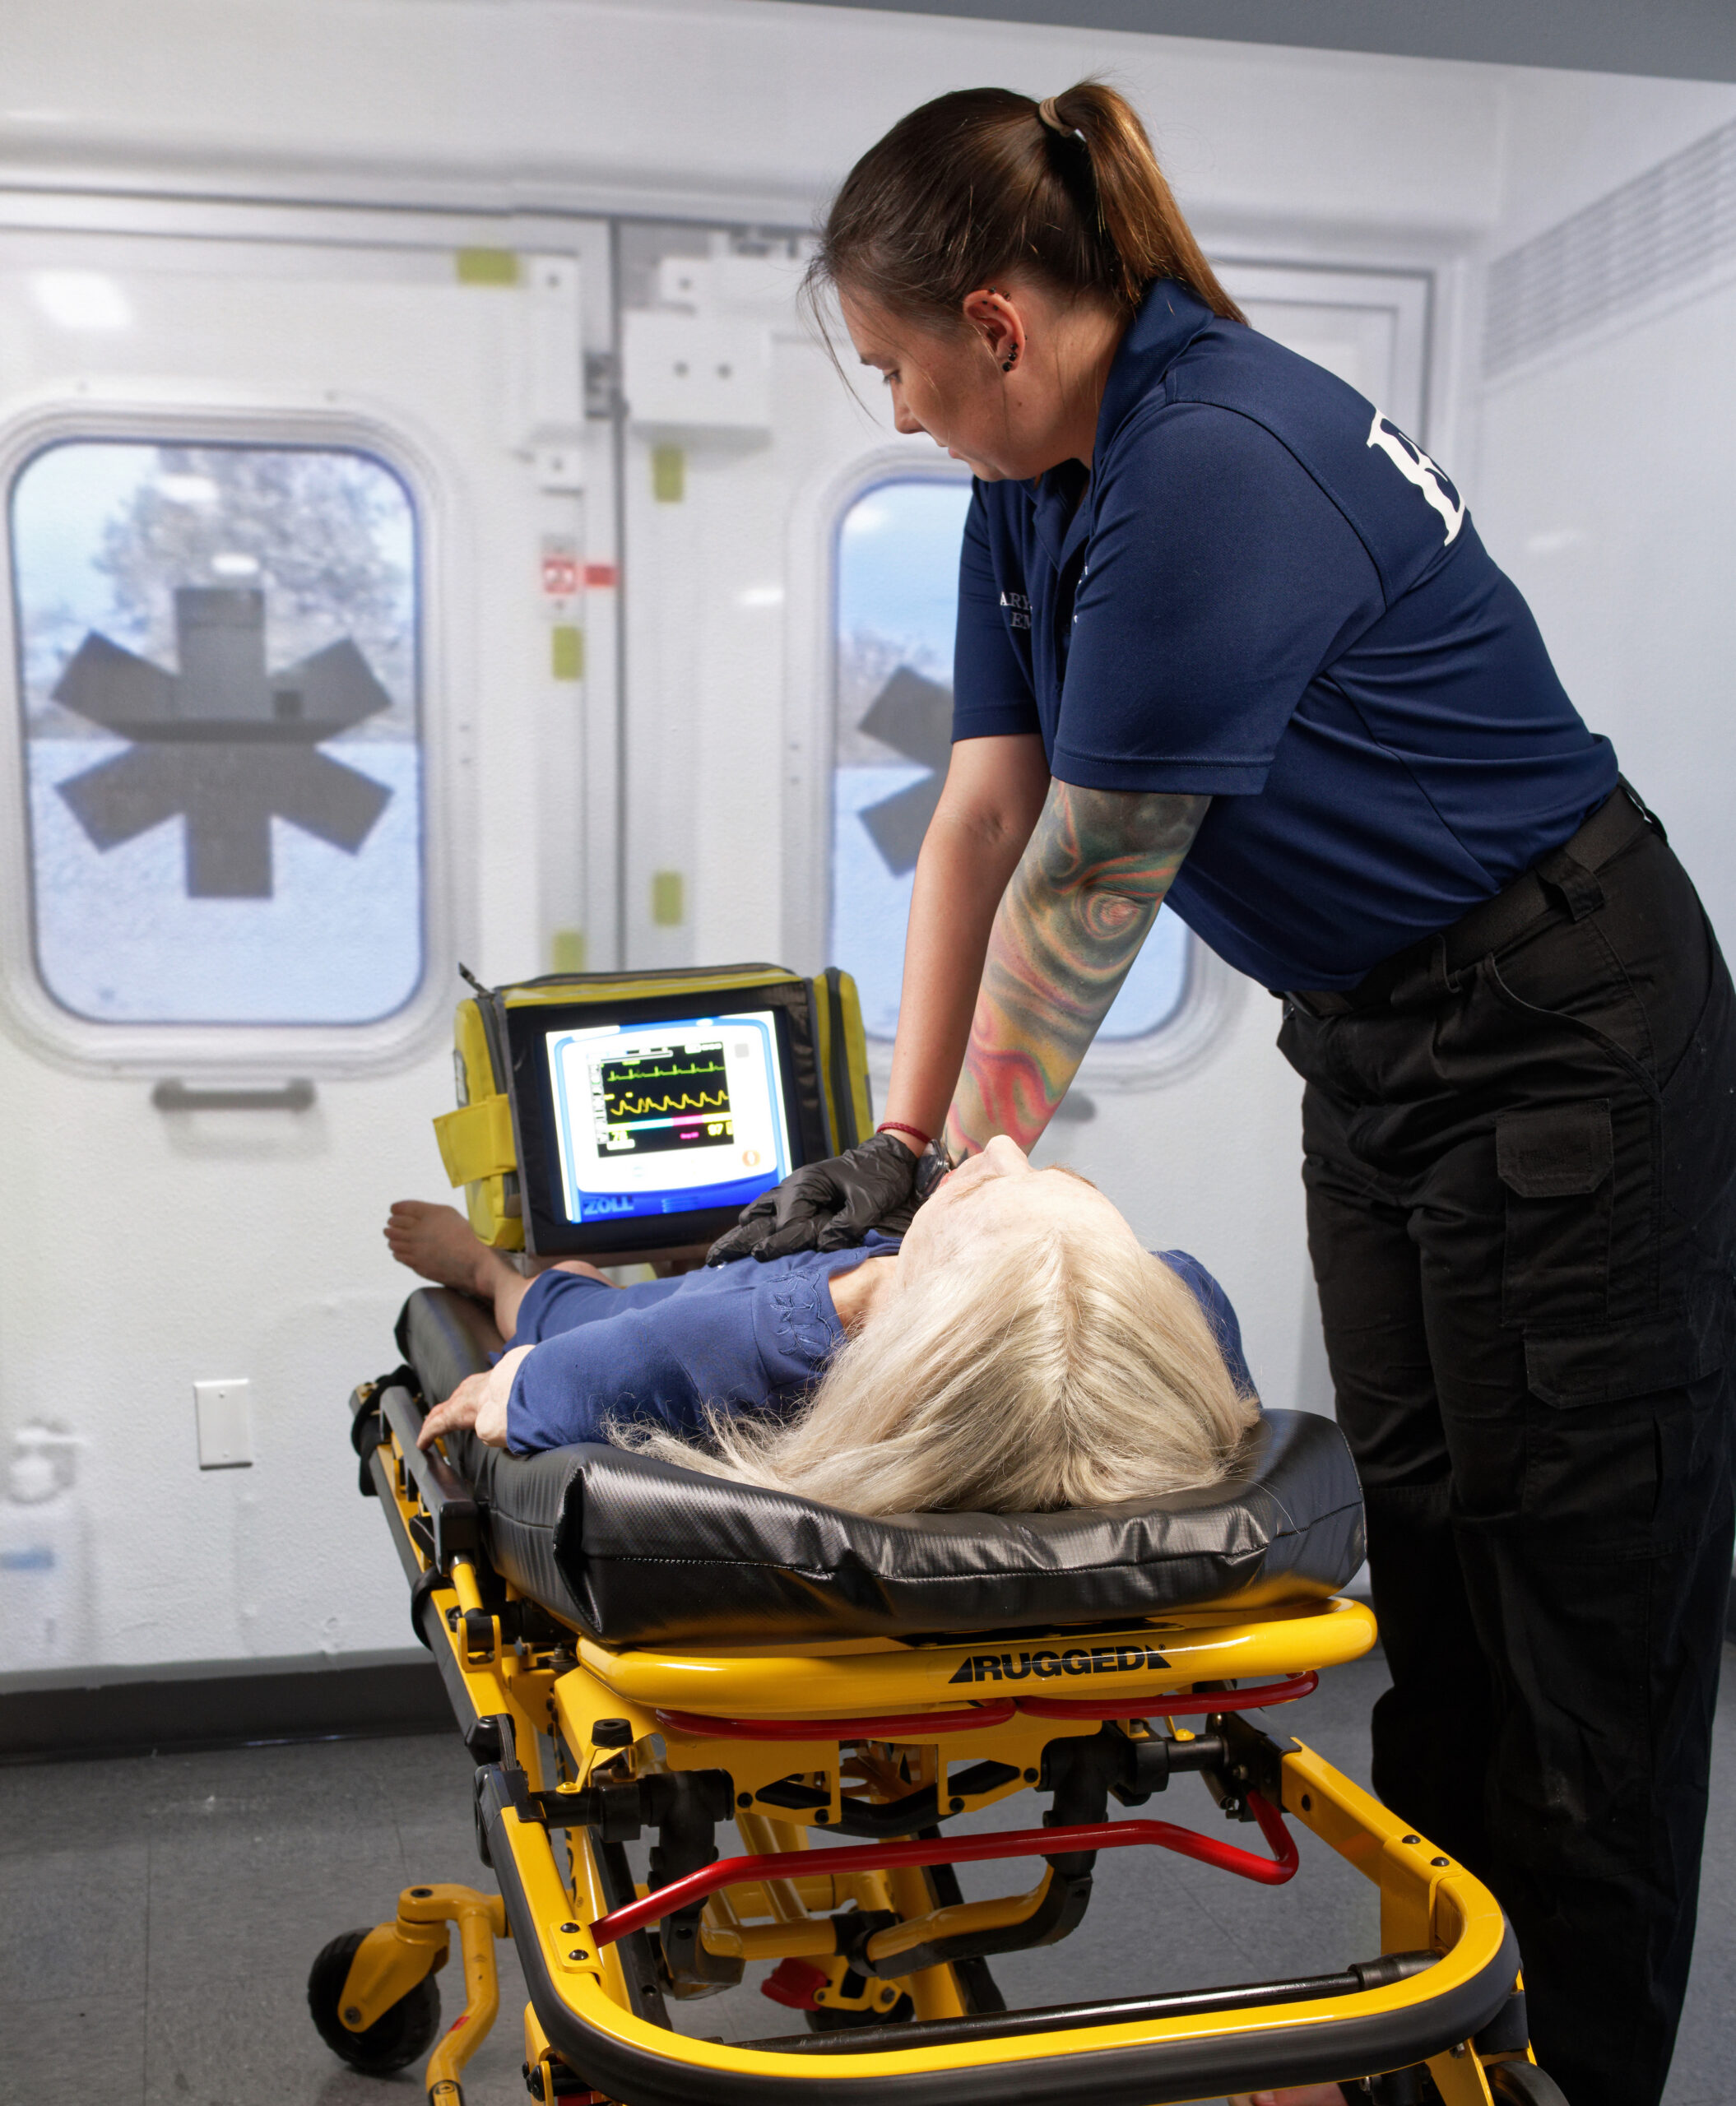 Echo Healthcare's Echo Complete turnkey simulation solution